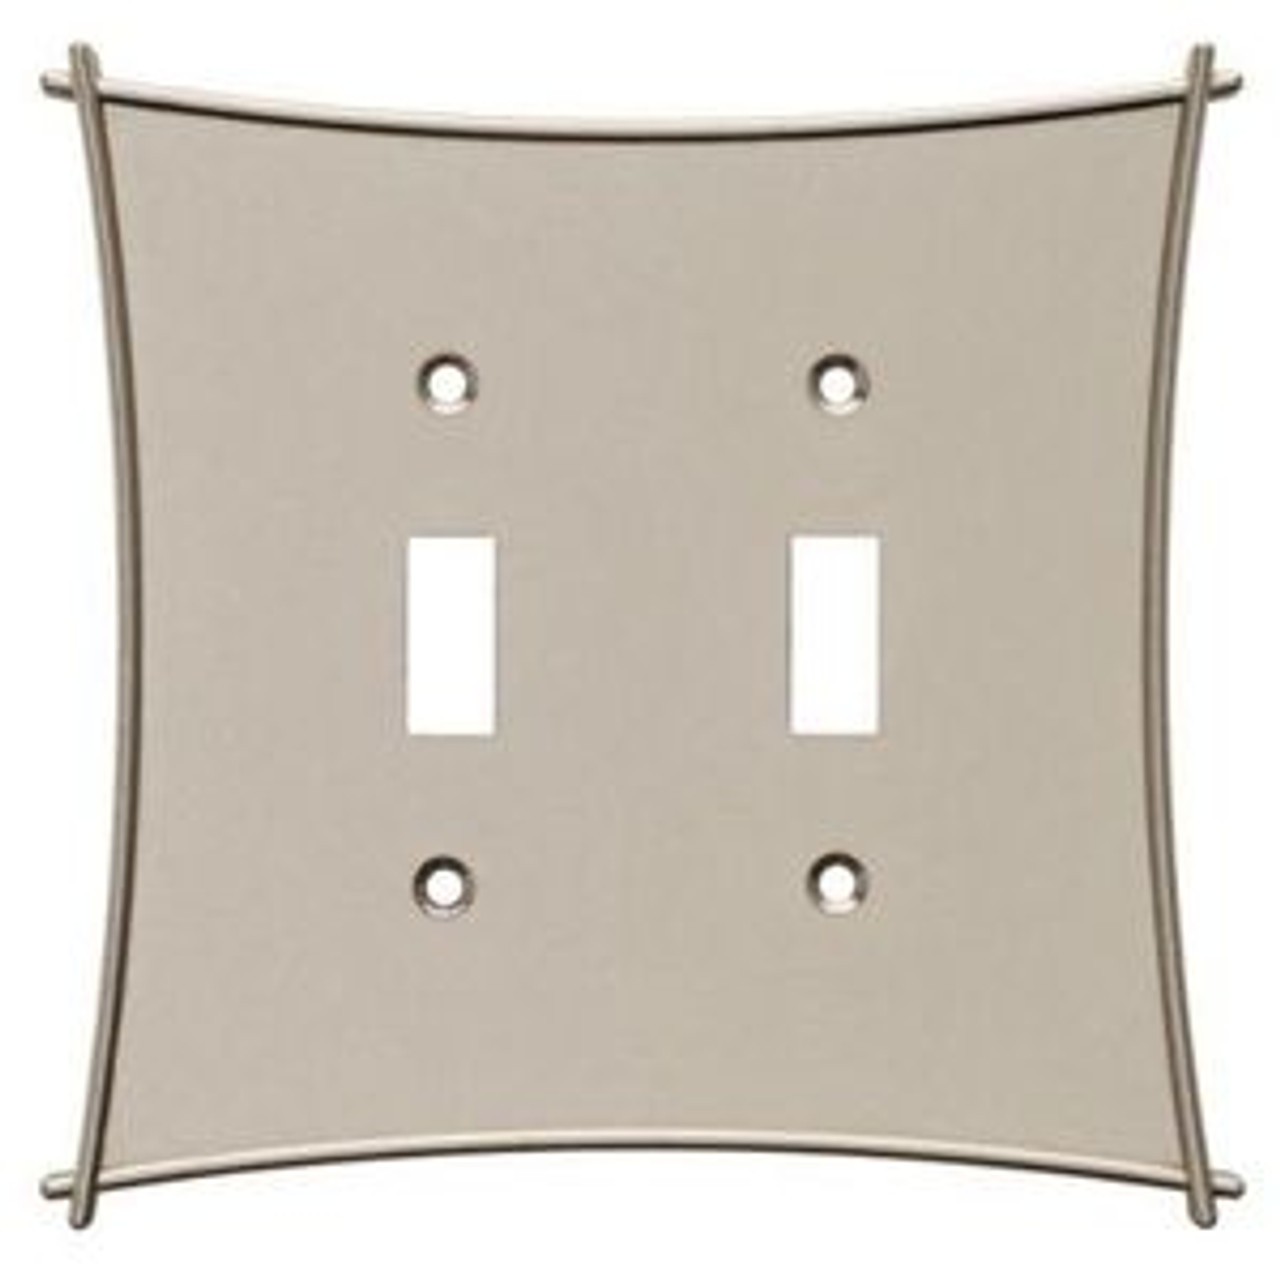 144063  Bellaire Vintage Nickel Double Switch Cover Plate